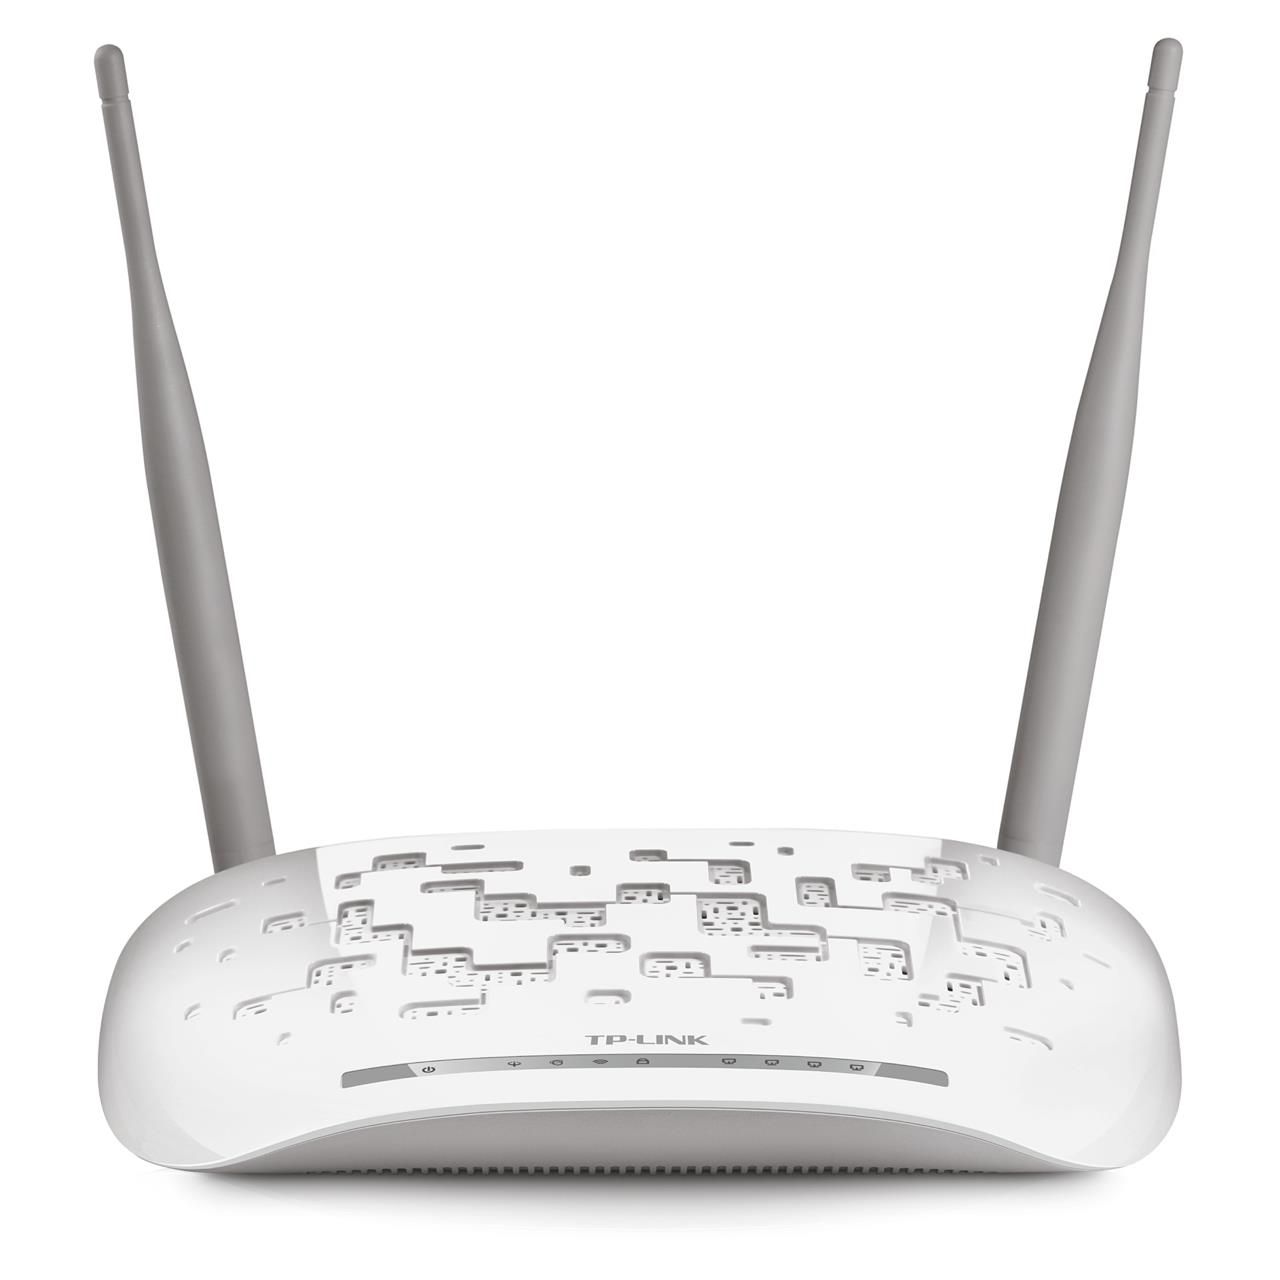 TP-LINK TD-W8961N Router Wireless